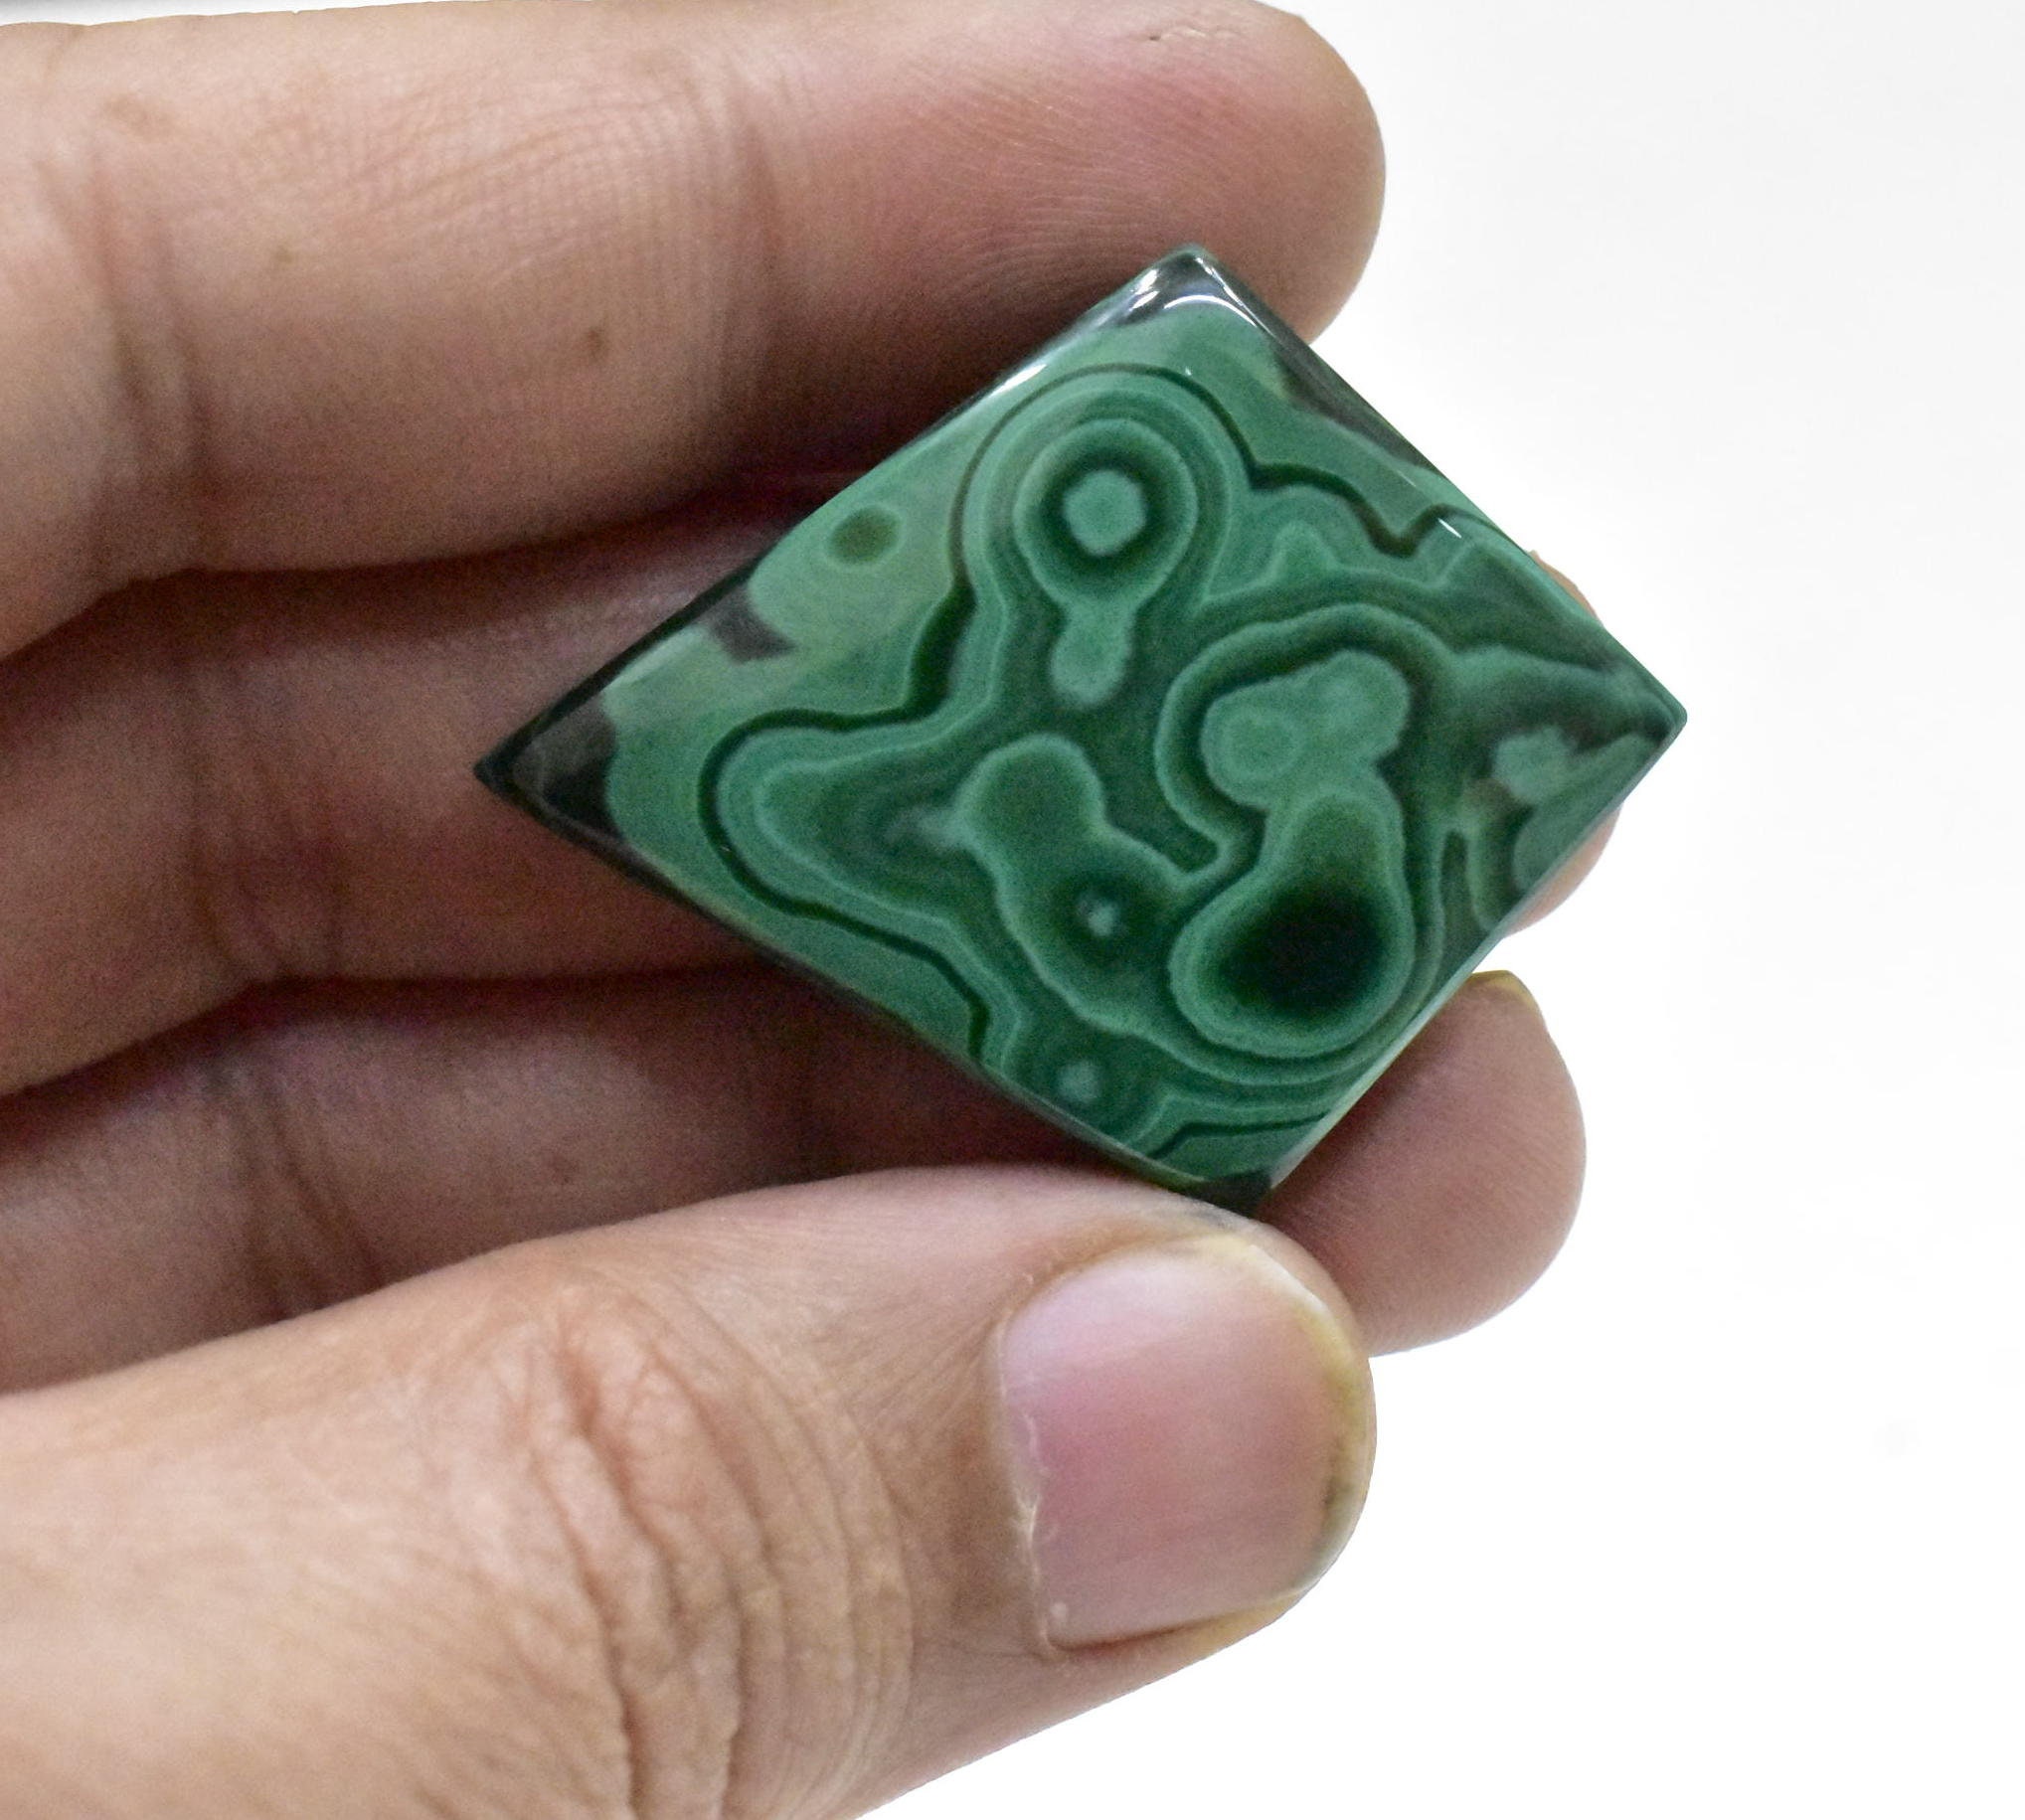 Natural Malachite Gemstone,Gemstone Cabochon,New Year Gift,Christmas Gift,Gift For Her,Mother’s Day Gift,Making For Jewellery,Gemstone Cab. | Save 33% - Rajasthan Living 11